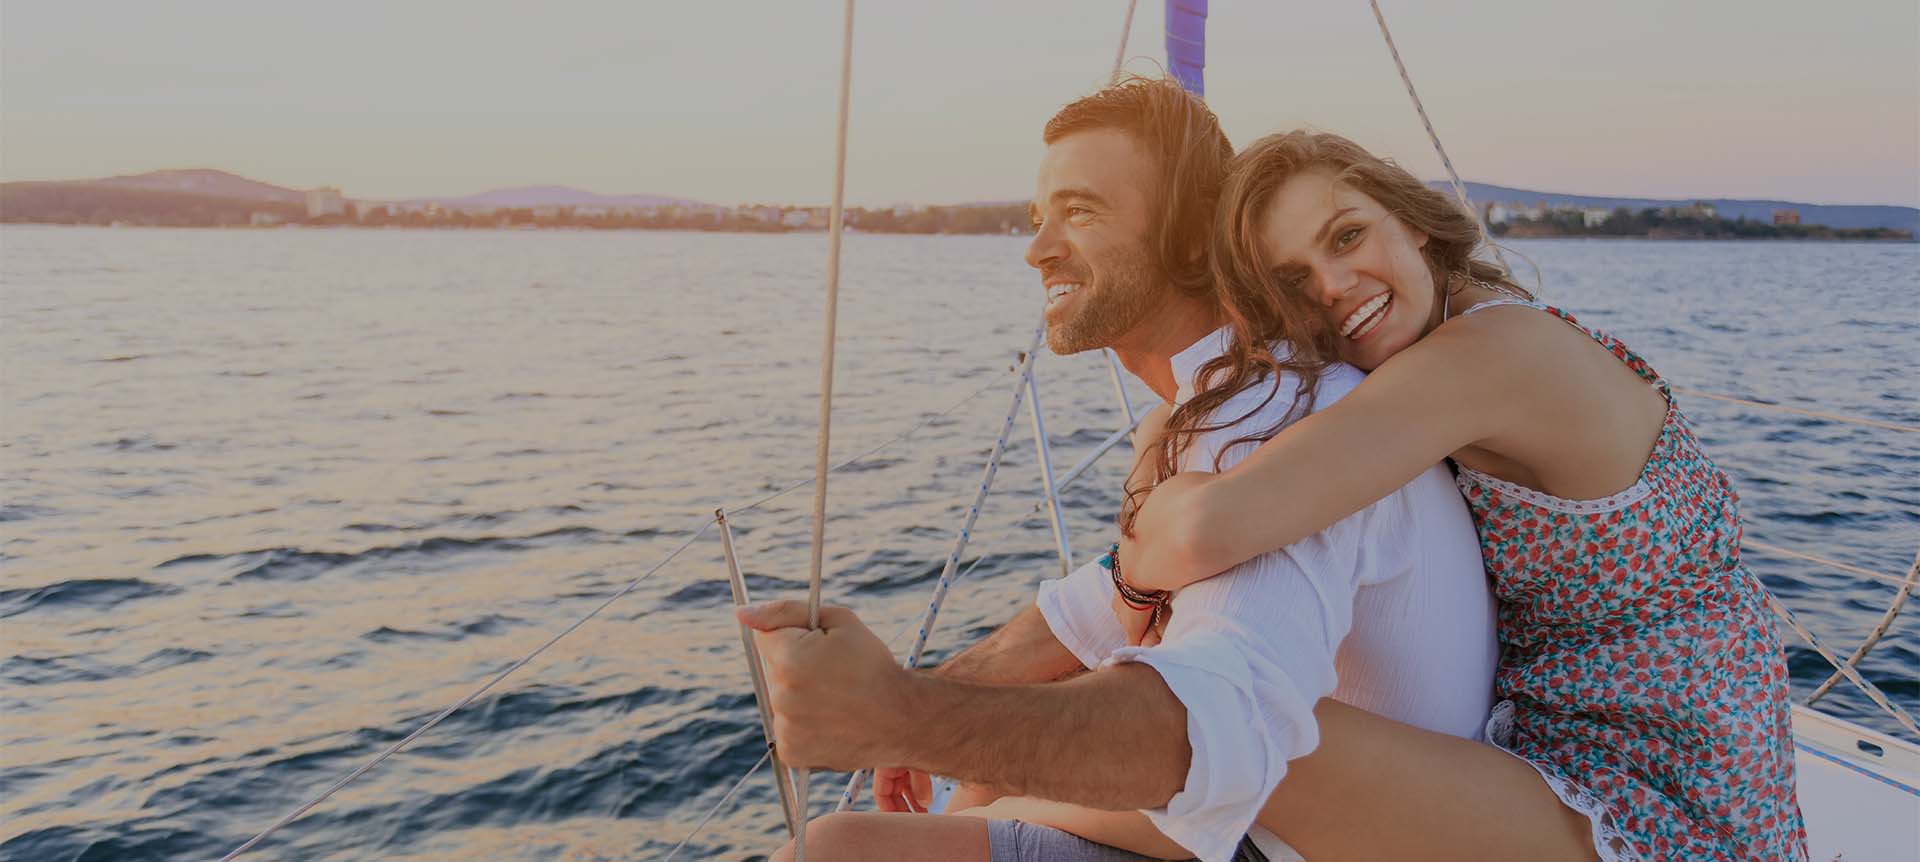 Couple embracing each other on a boat 